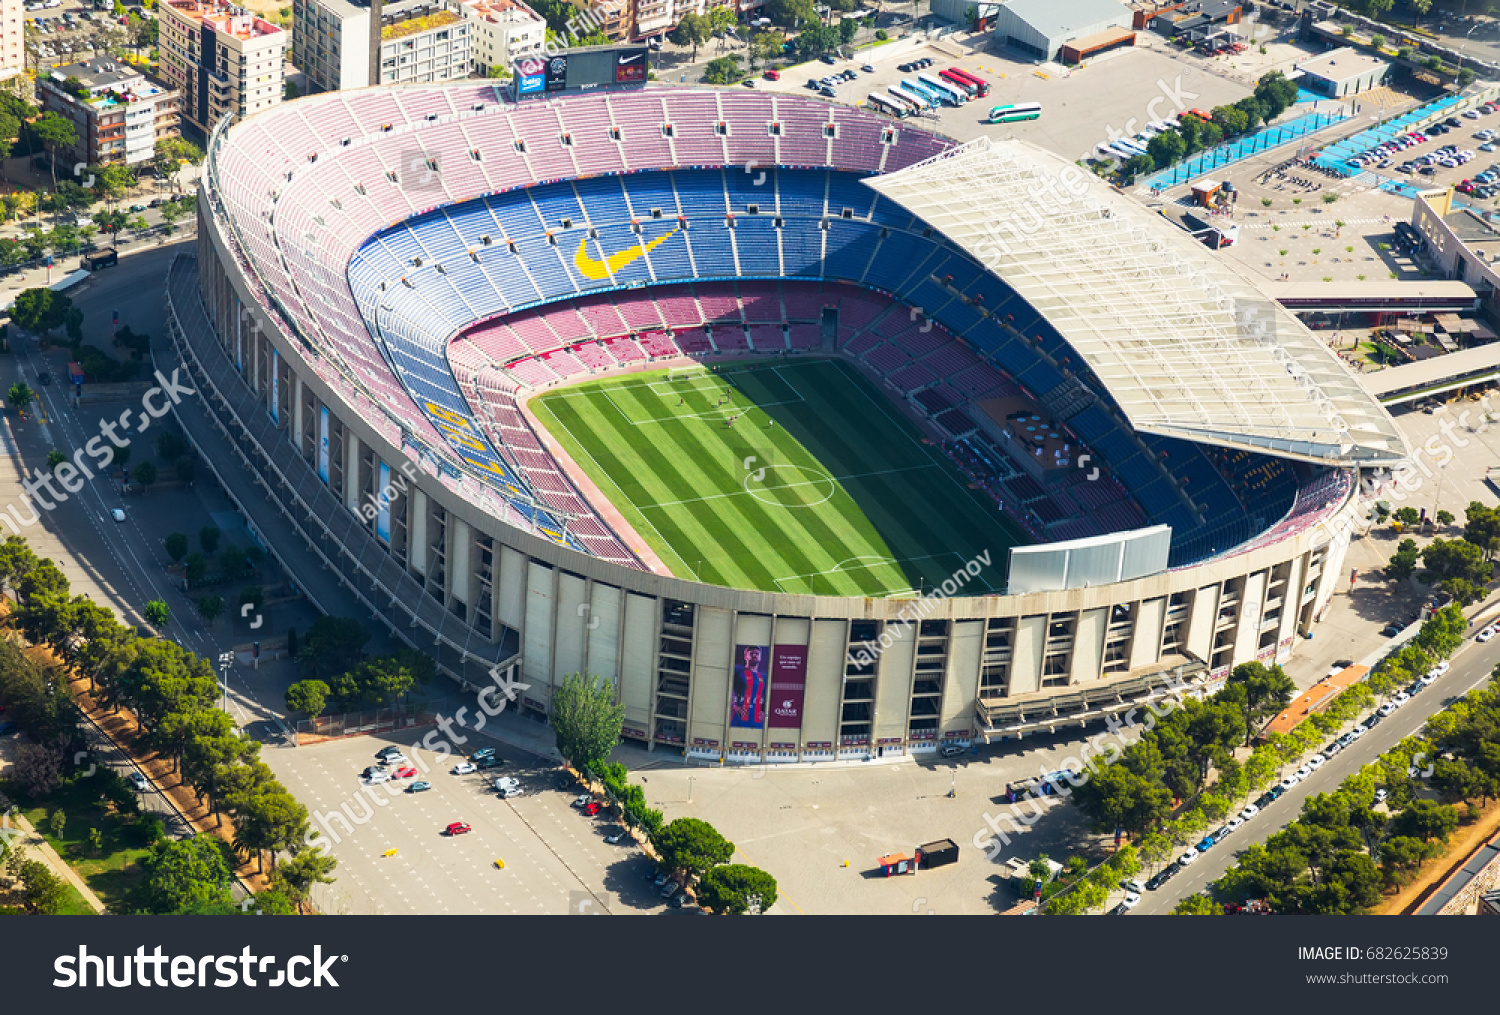 BARCELONA, SPAIN - AUGUST 7, 2016: Aerial view at Camp Nou, famous footbal stadium in Barcelona of Catalonia, Spain
 #682625839